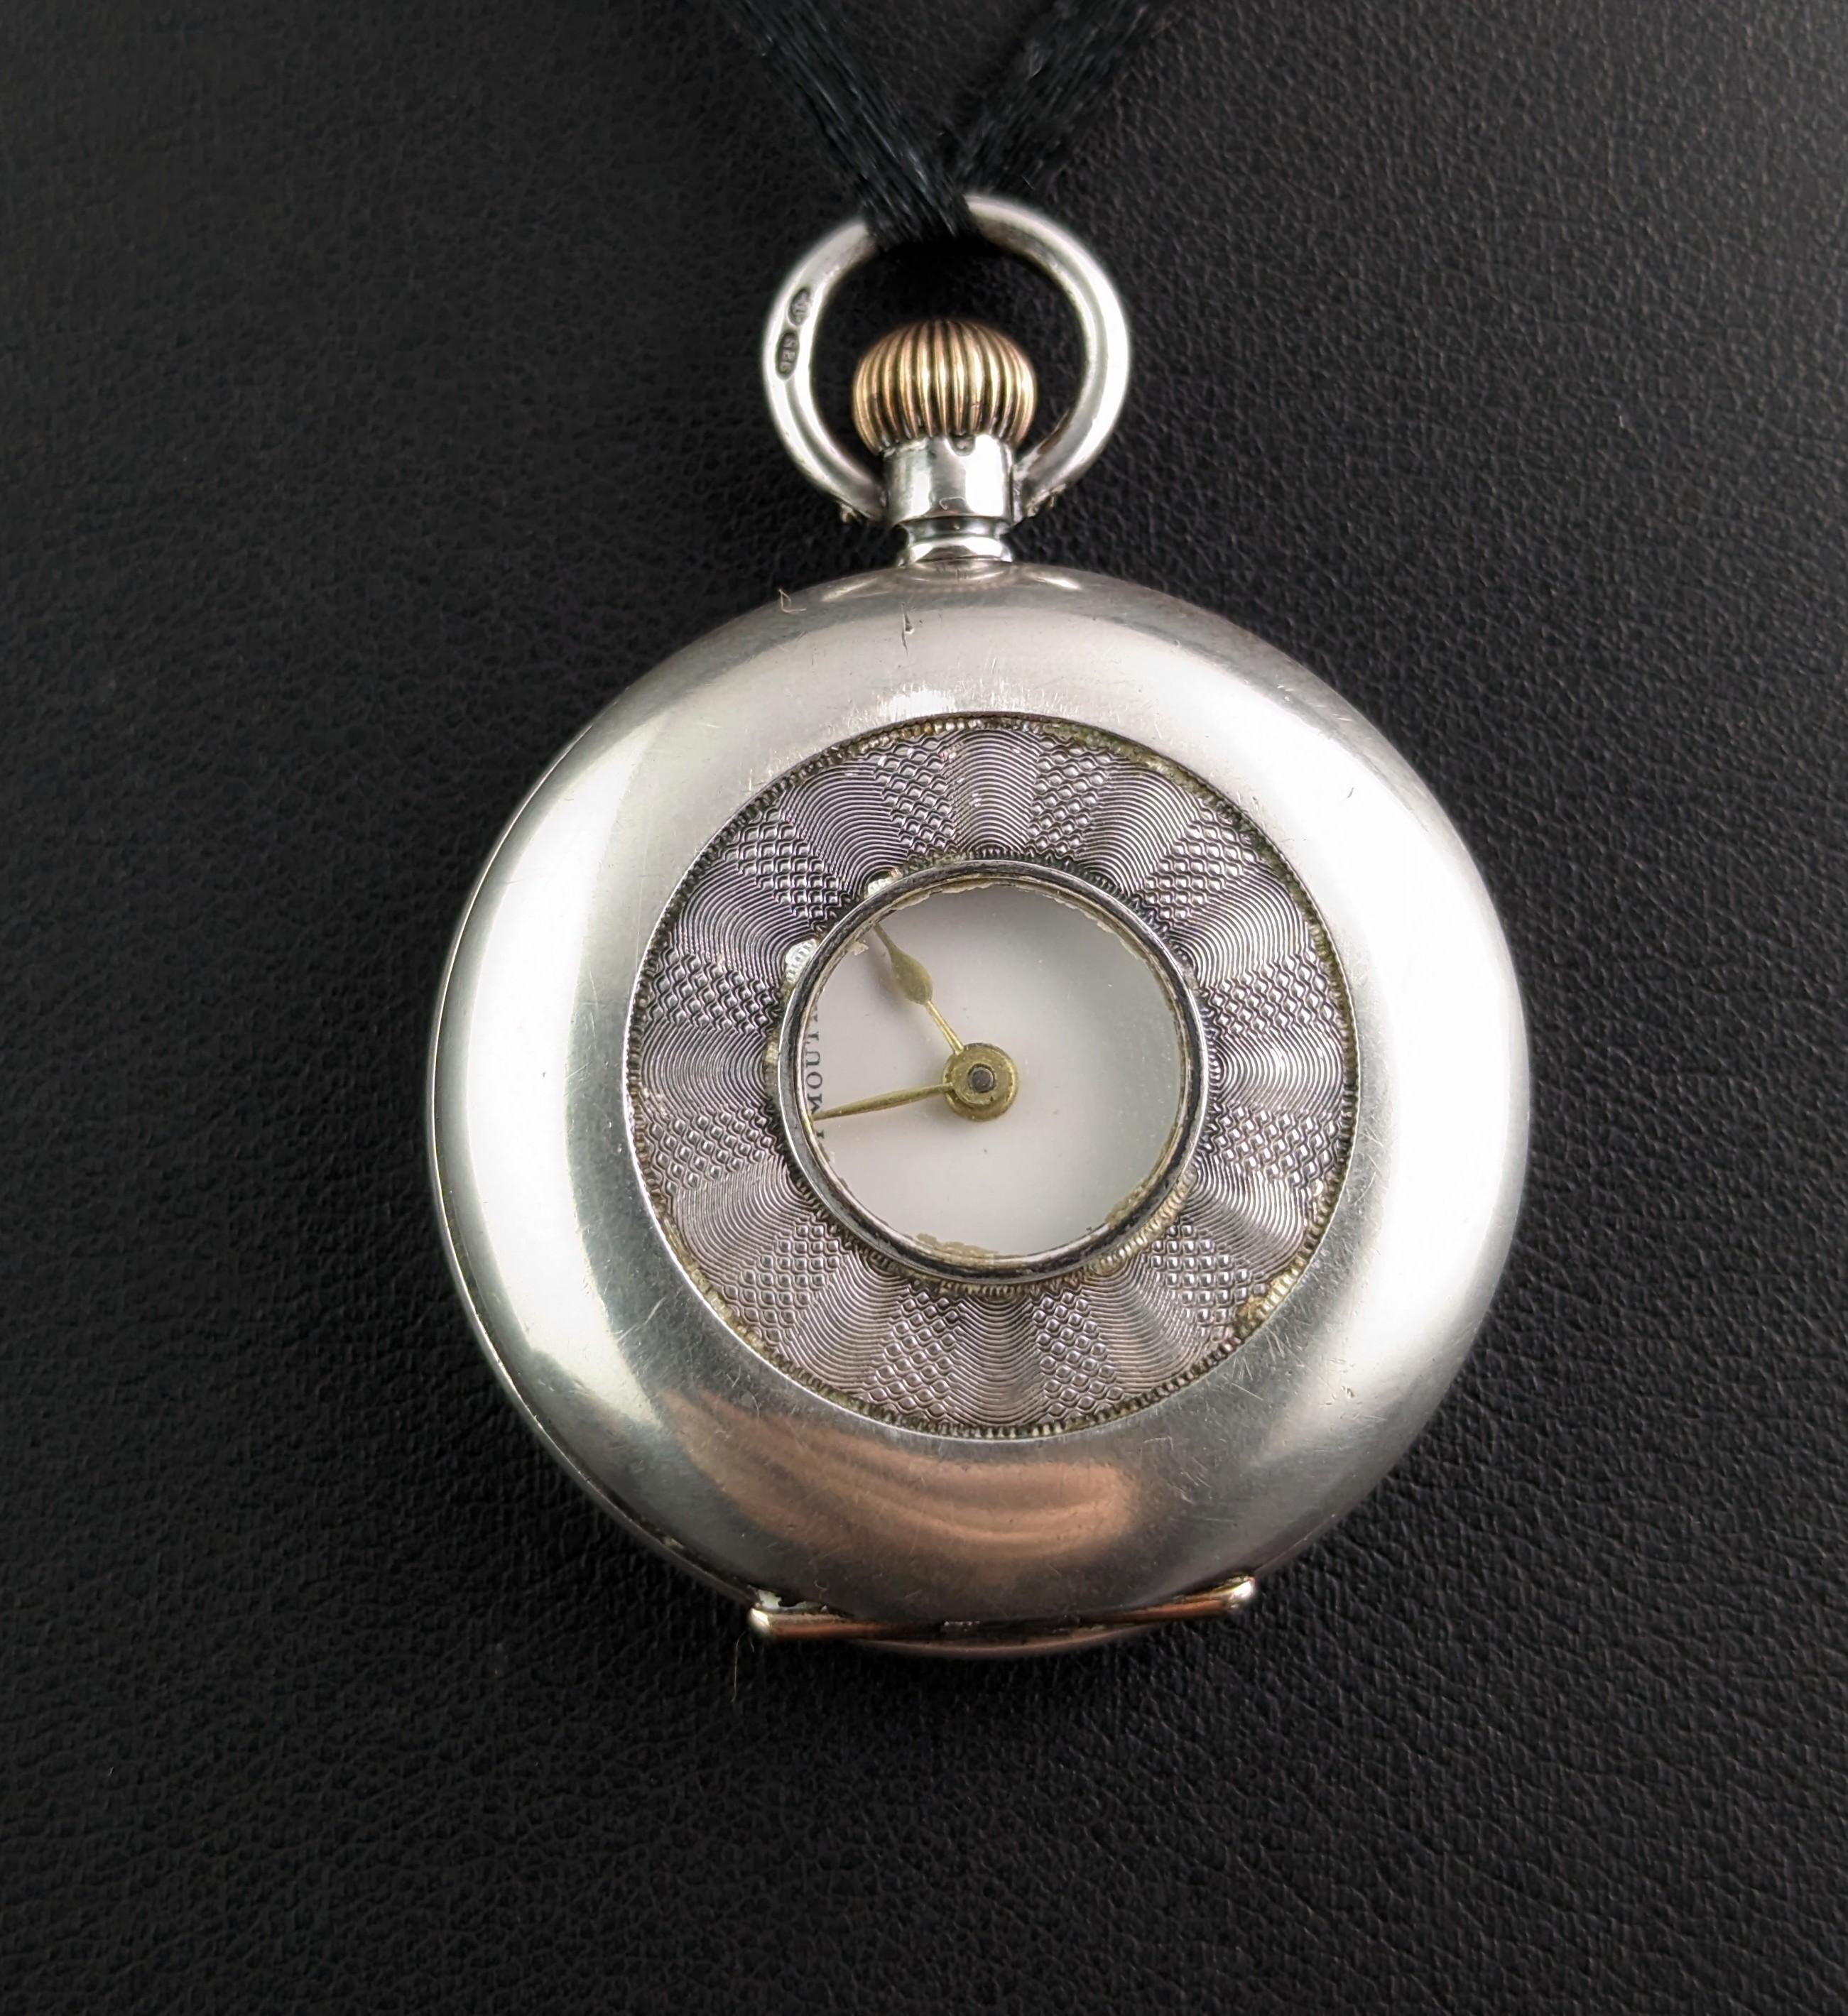 This classic antique silver half hunter fob watch is an Edwardian-era beauty.

The pocket watch brings sophistication to any look and it is the perfect accessory for anyone looking to add a touch of vintage flair to their wardrobe.

This half hunter